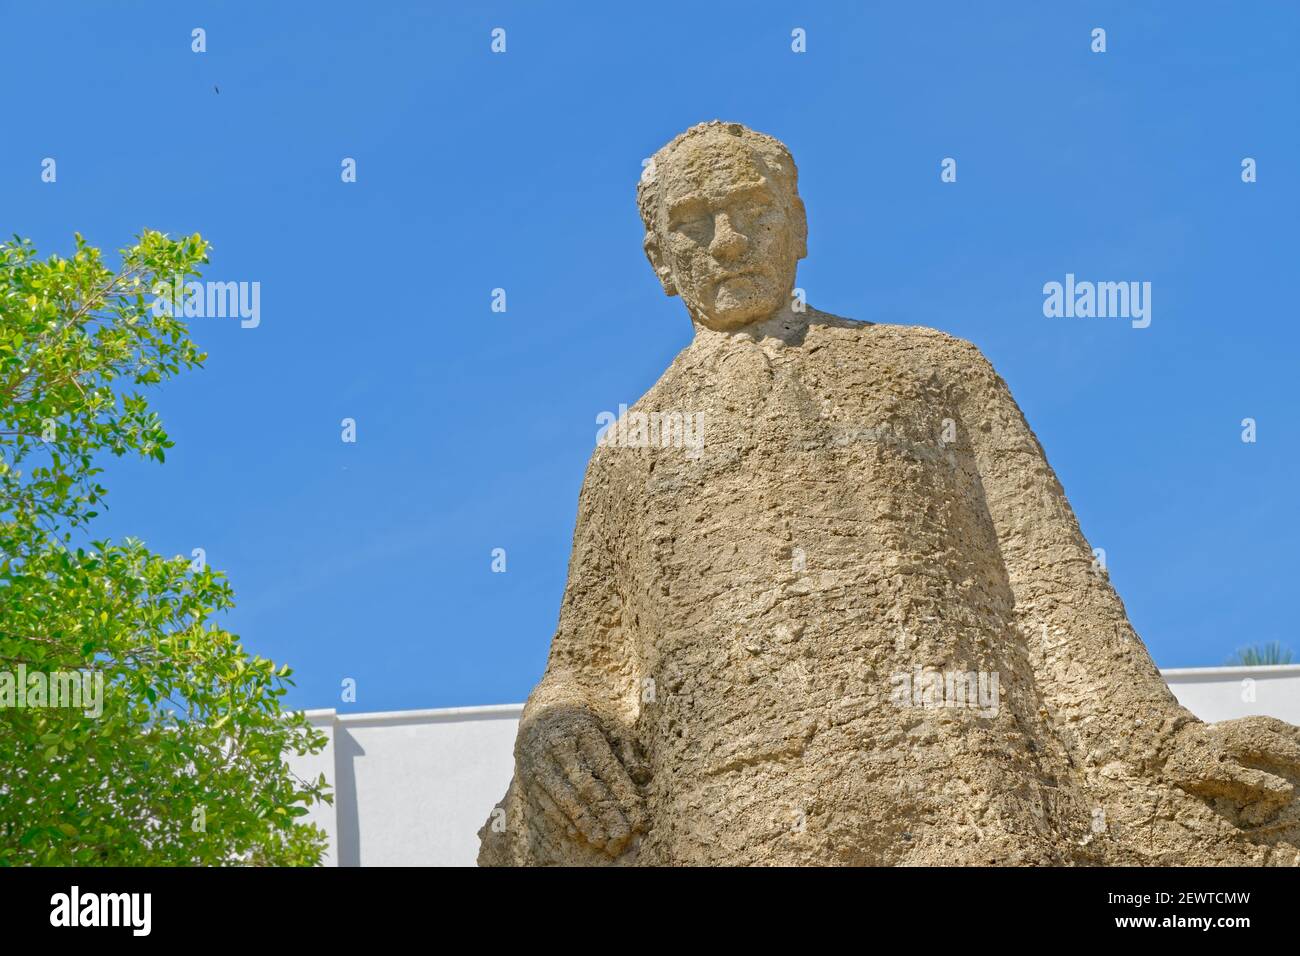 Statue of Mustafa Kemal Ataturk, the founder & former president of modern day Turkey situated outside Bodrum town hall, Mugla Province, Turkey. Stock Photo